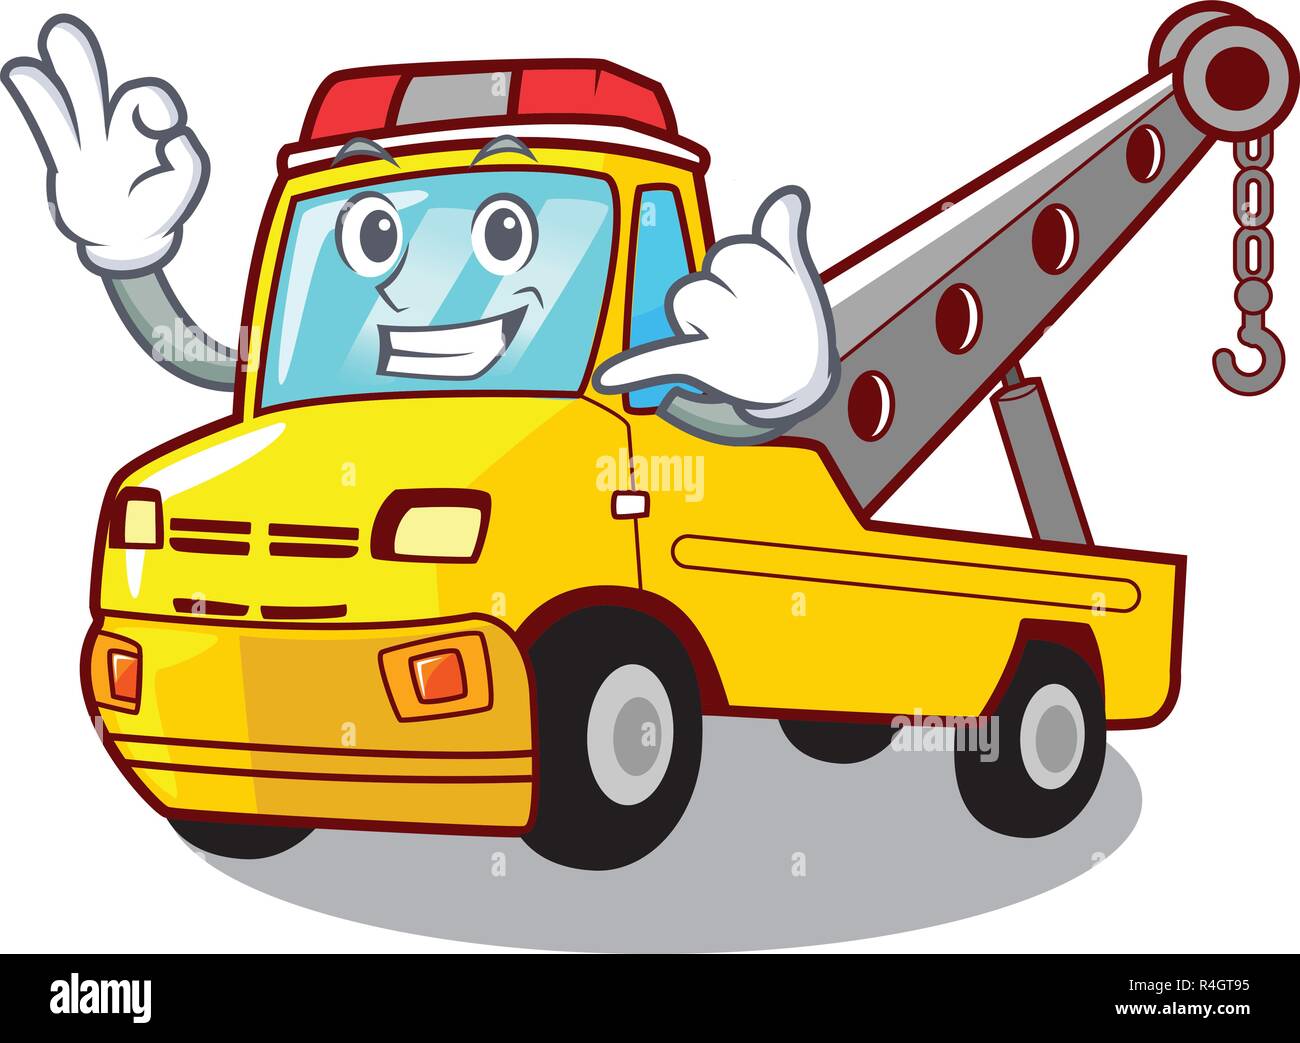 Call me tow truck for vehicle branding character Stock Vector